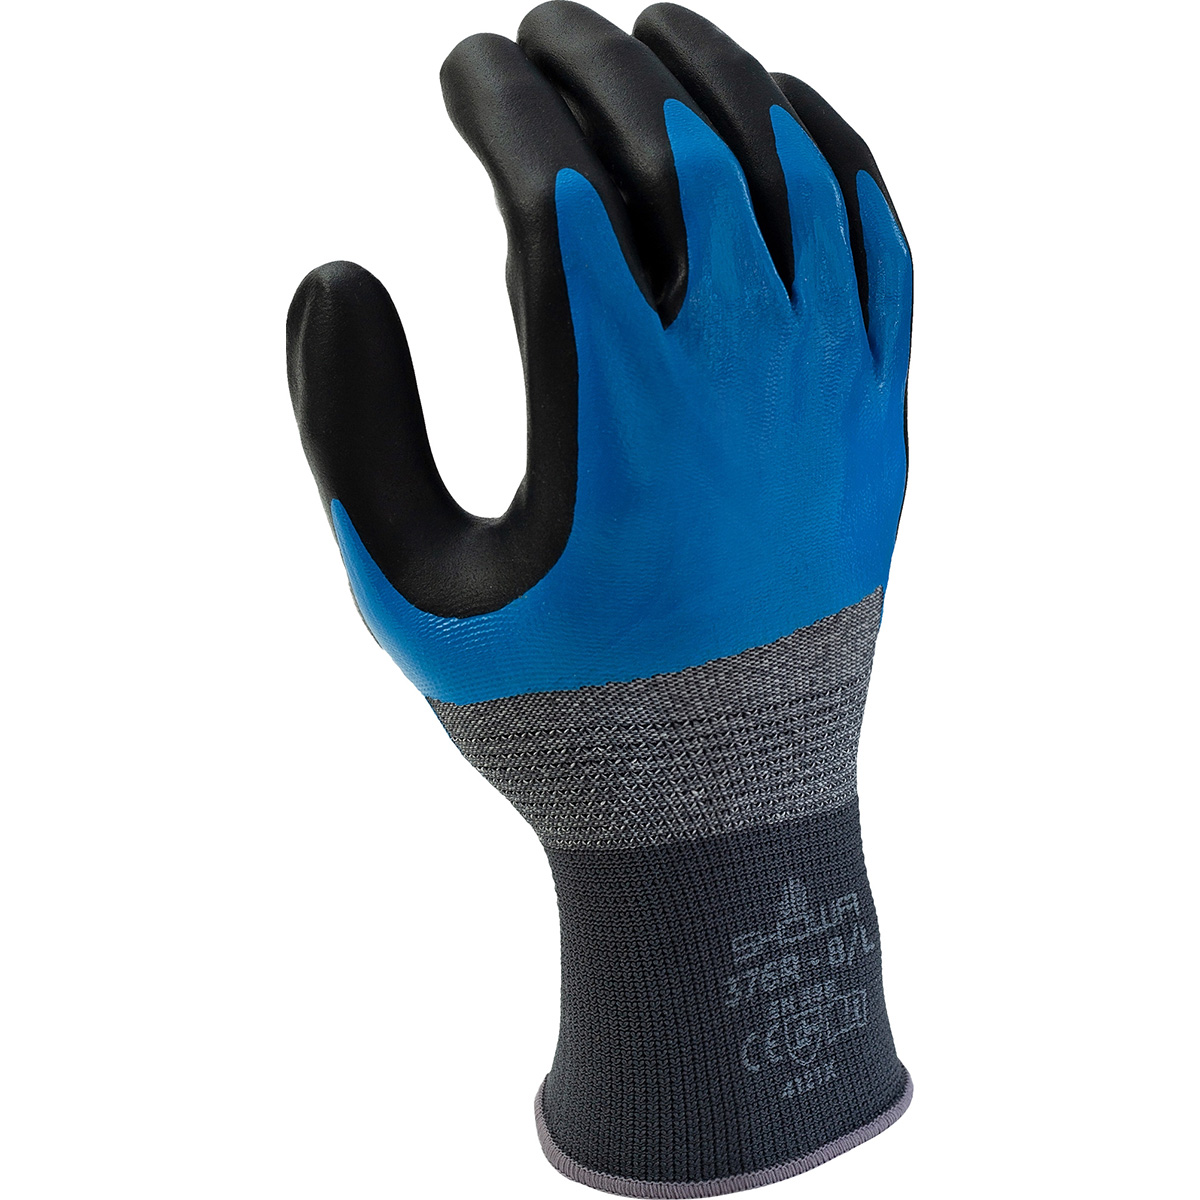 General purpose 3/4 nitrile blue undercoating w/black foamed palm coating, 13 gauge, 3/4 for over knuckle protection,  liquid resistant, seamless knitted liner, medium